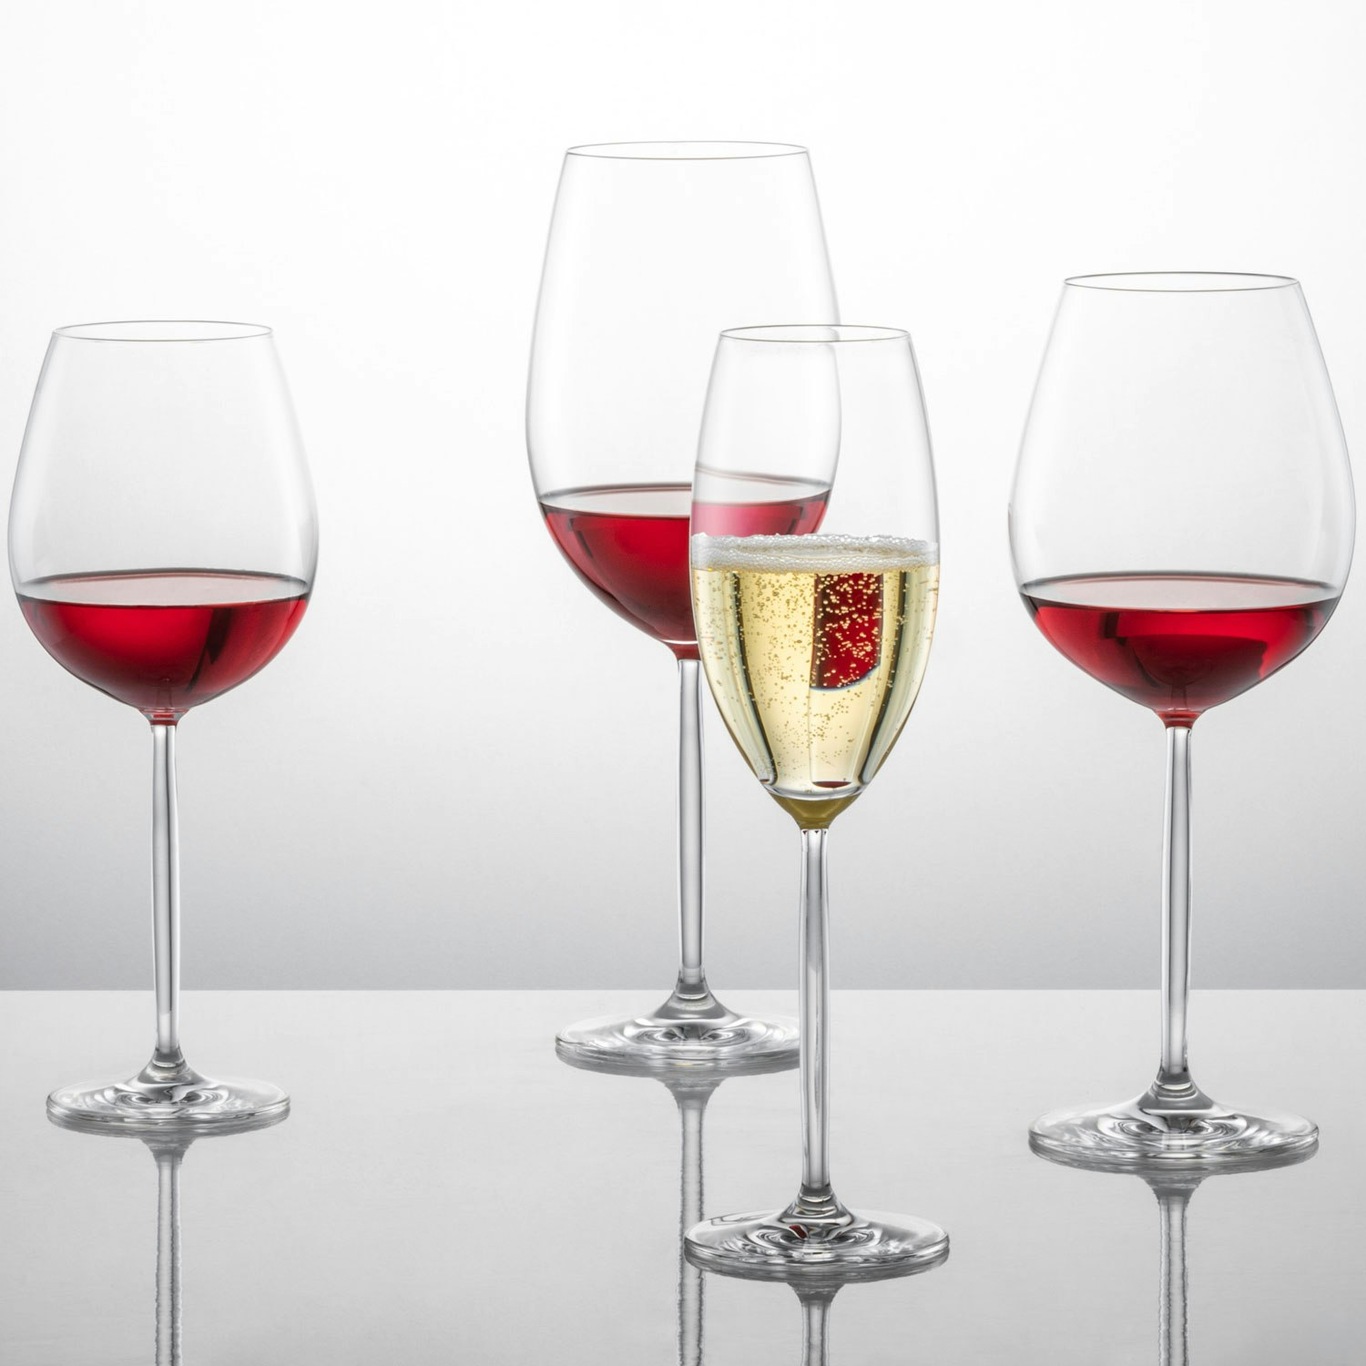 https://royaldesign.com/image/2/zwiesel-diva-burgundy-red-wine-glass-84-cl-2-pack-2?w=800&quality=80